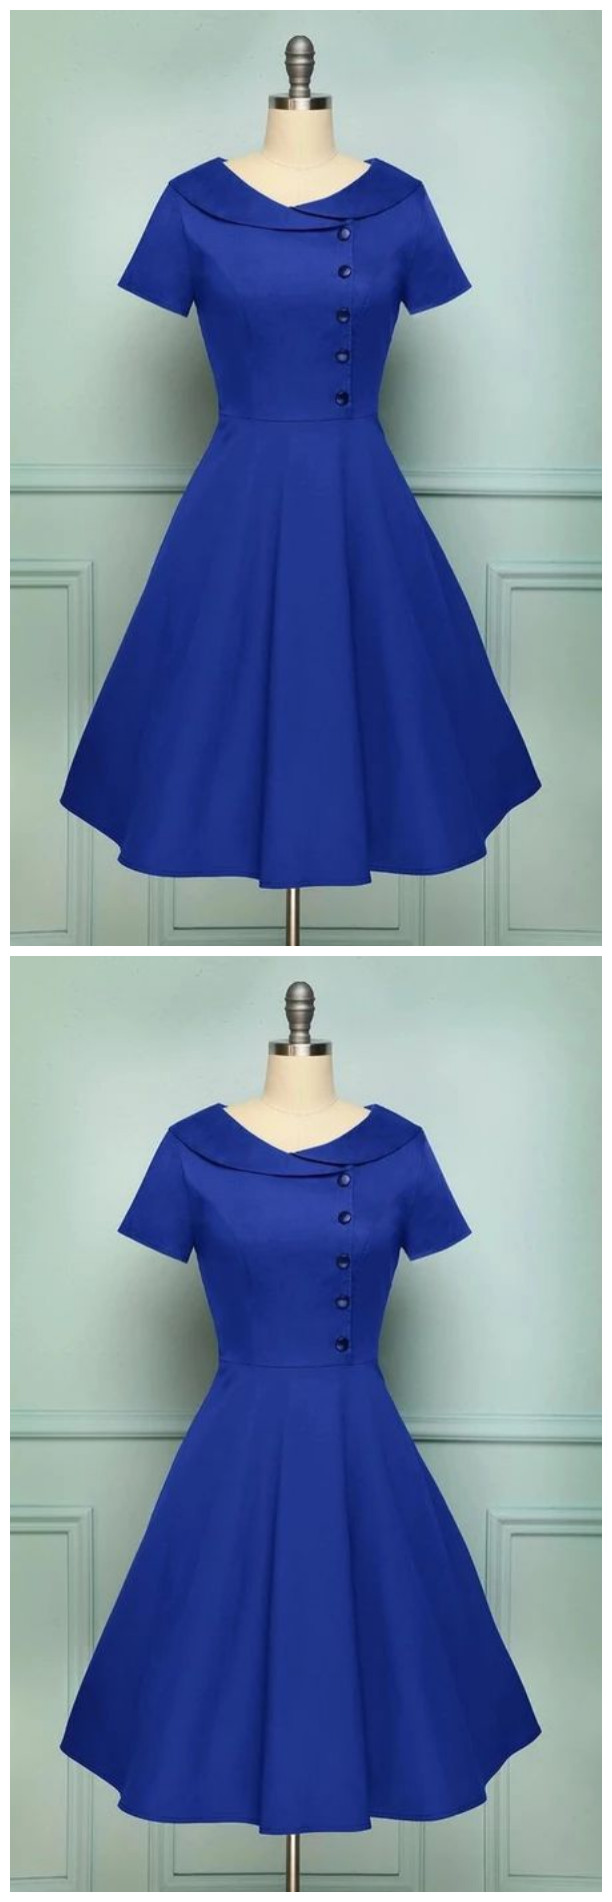 Blue Collared A Line Vintage Button Dress With Sleeves, Short Homecoming Dress